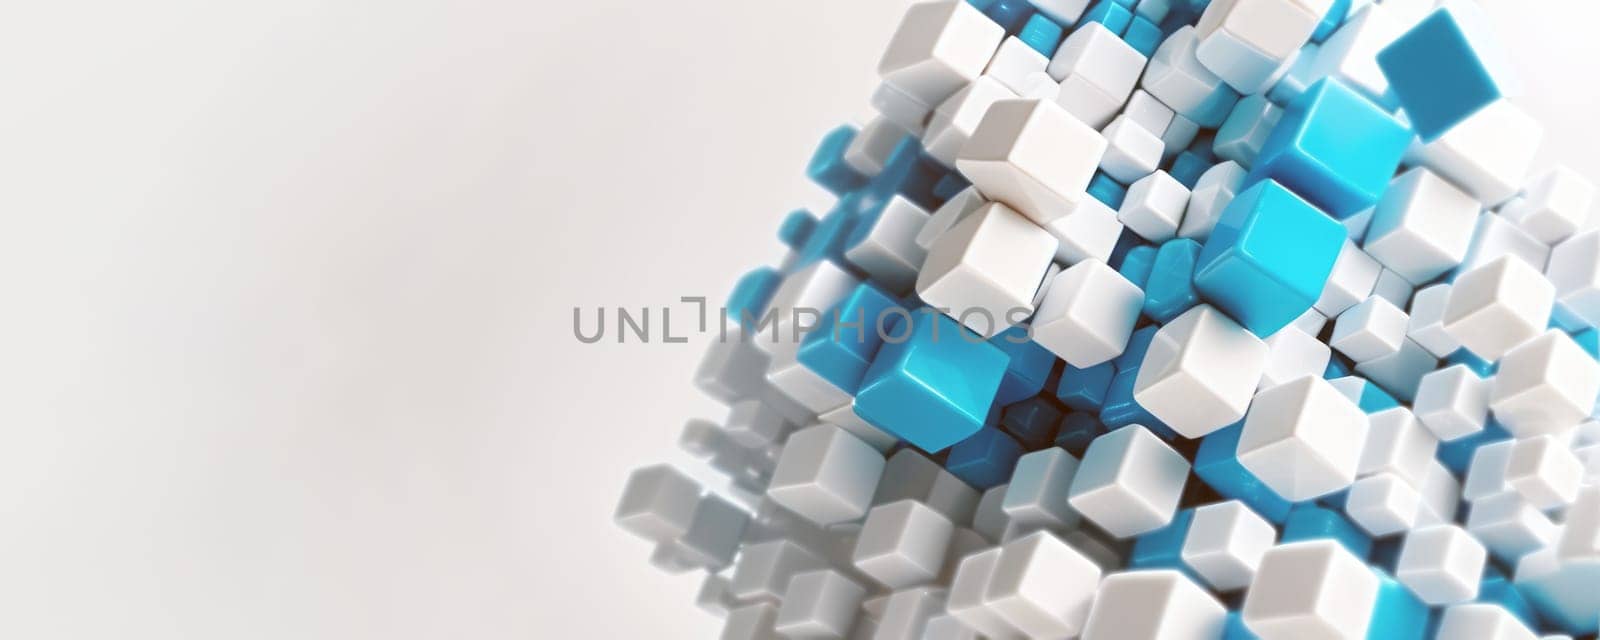 Art Image Of Cluster of 3D Cubes in Blue and White by nkotlyar